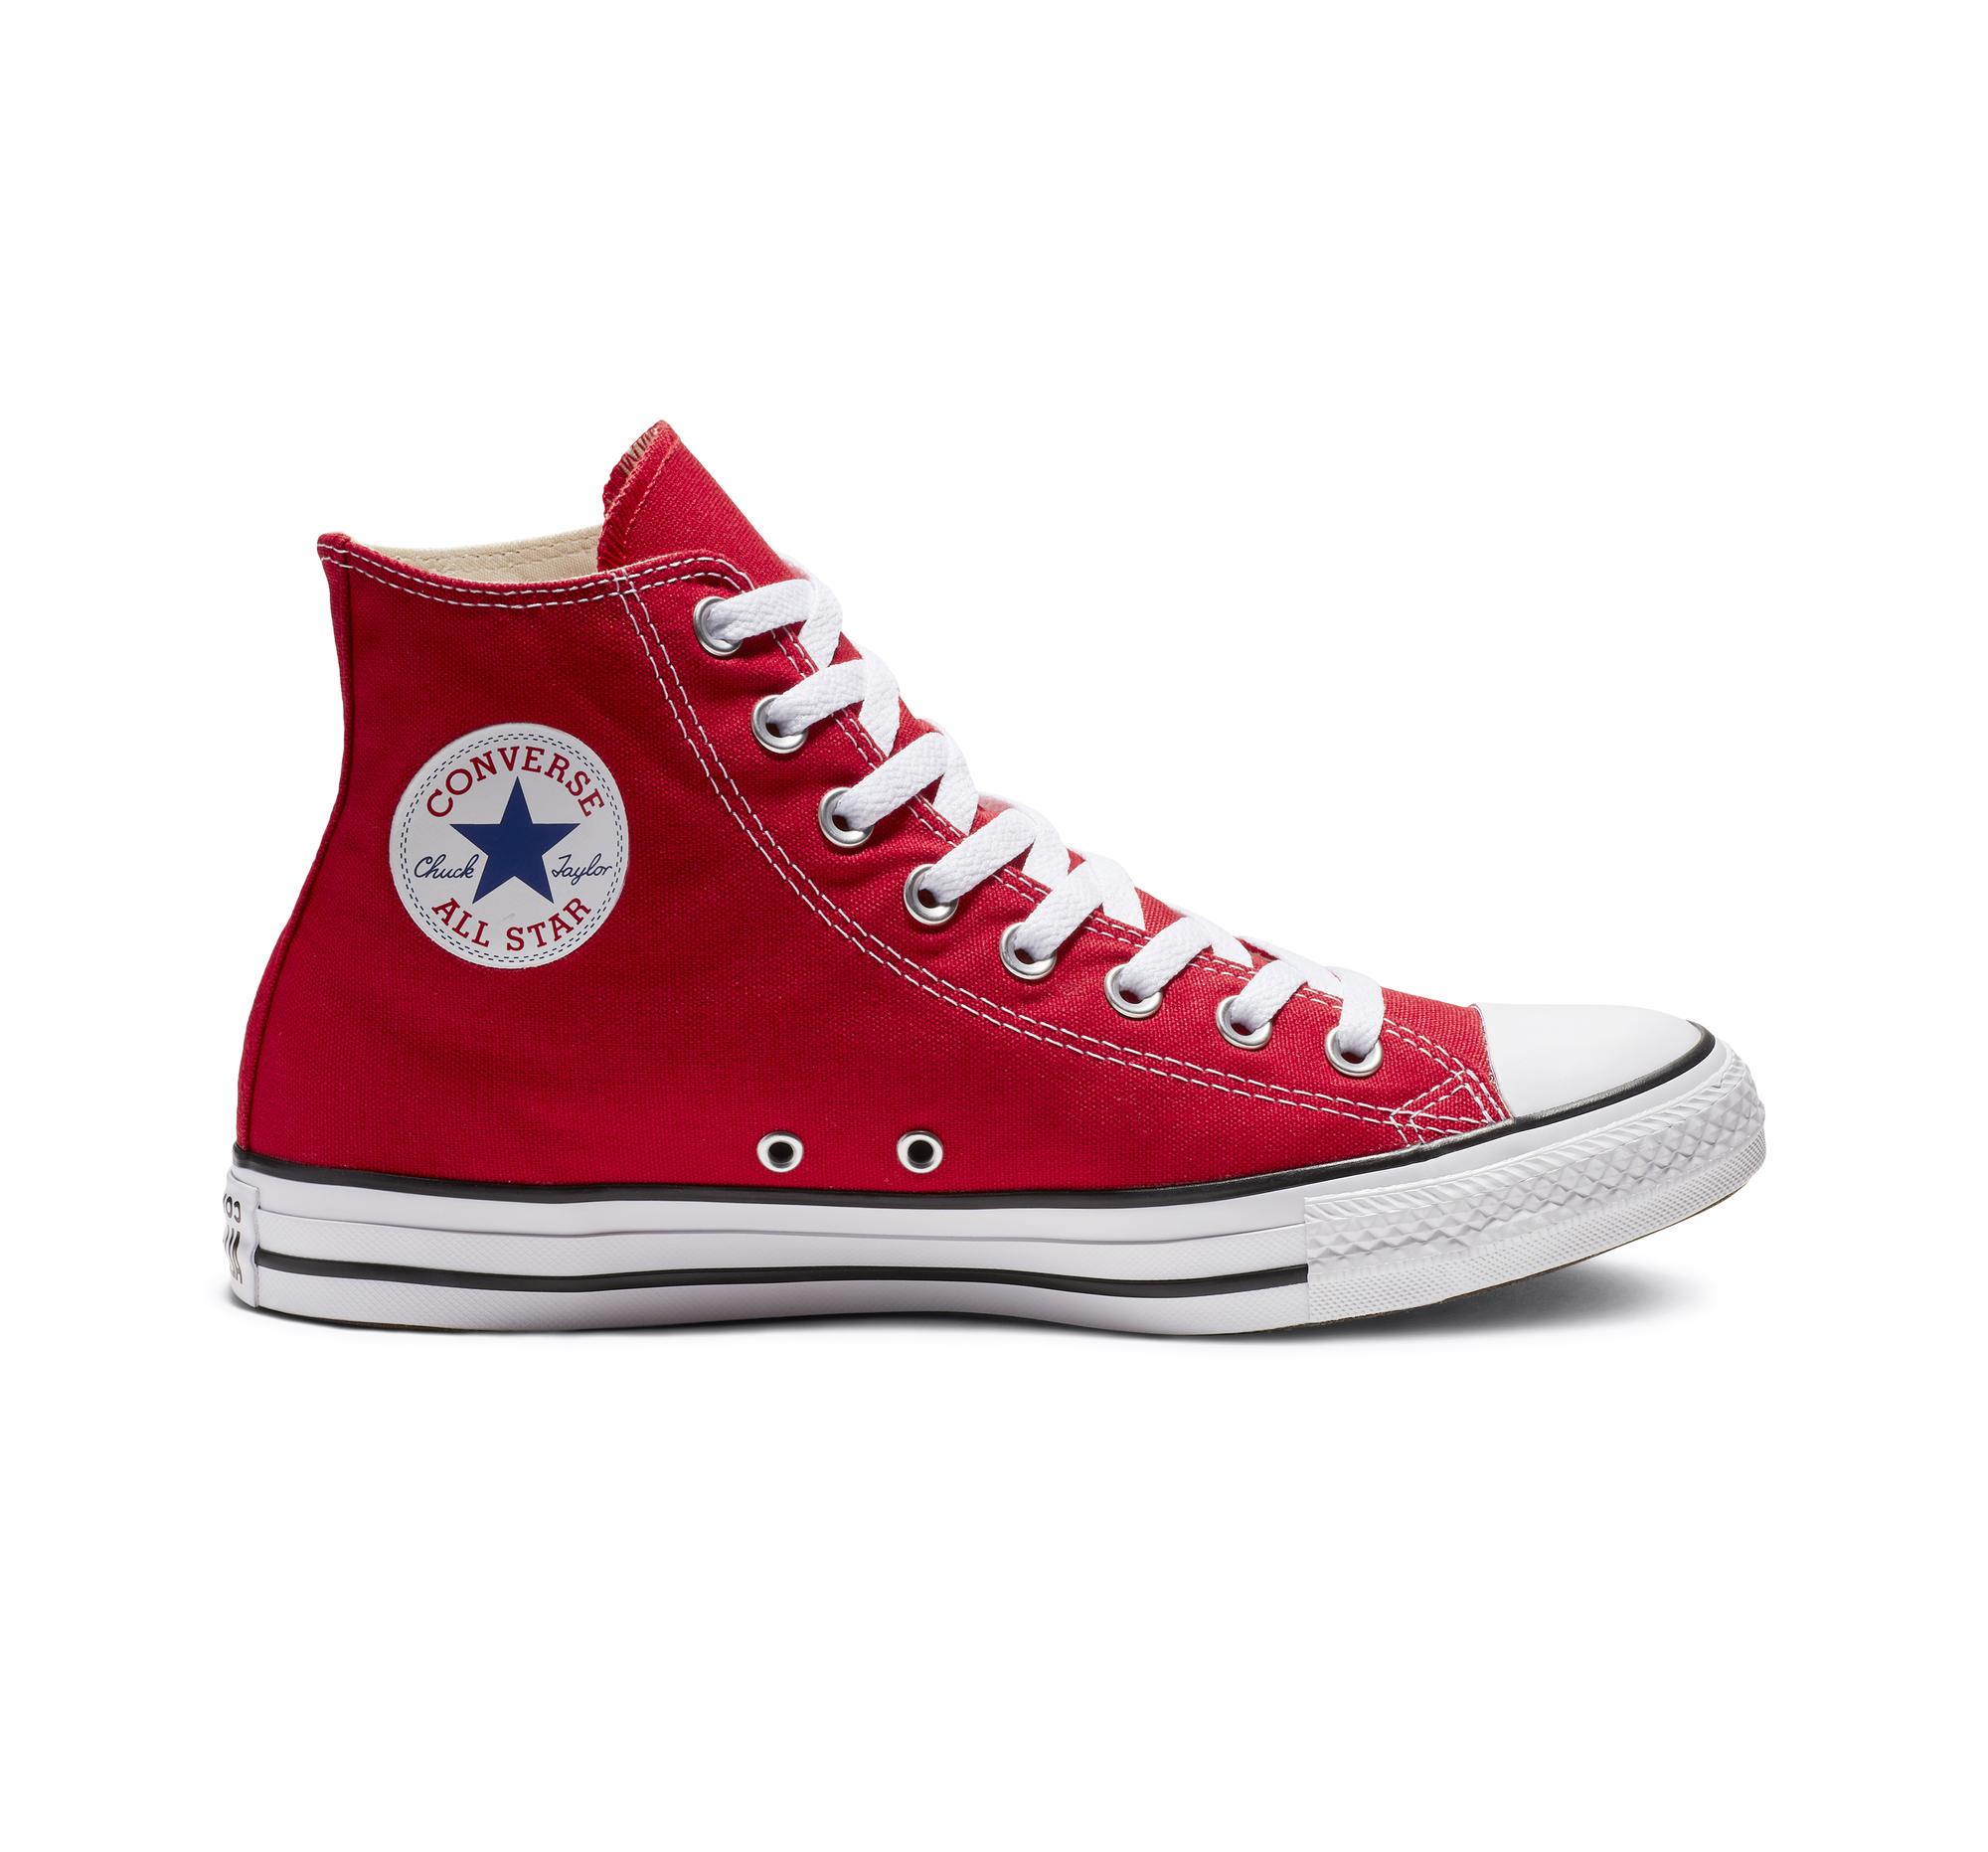 Converse Canvas Chuck Taylor All Star High Top Sneaker in Red - Save 58 ...